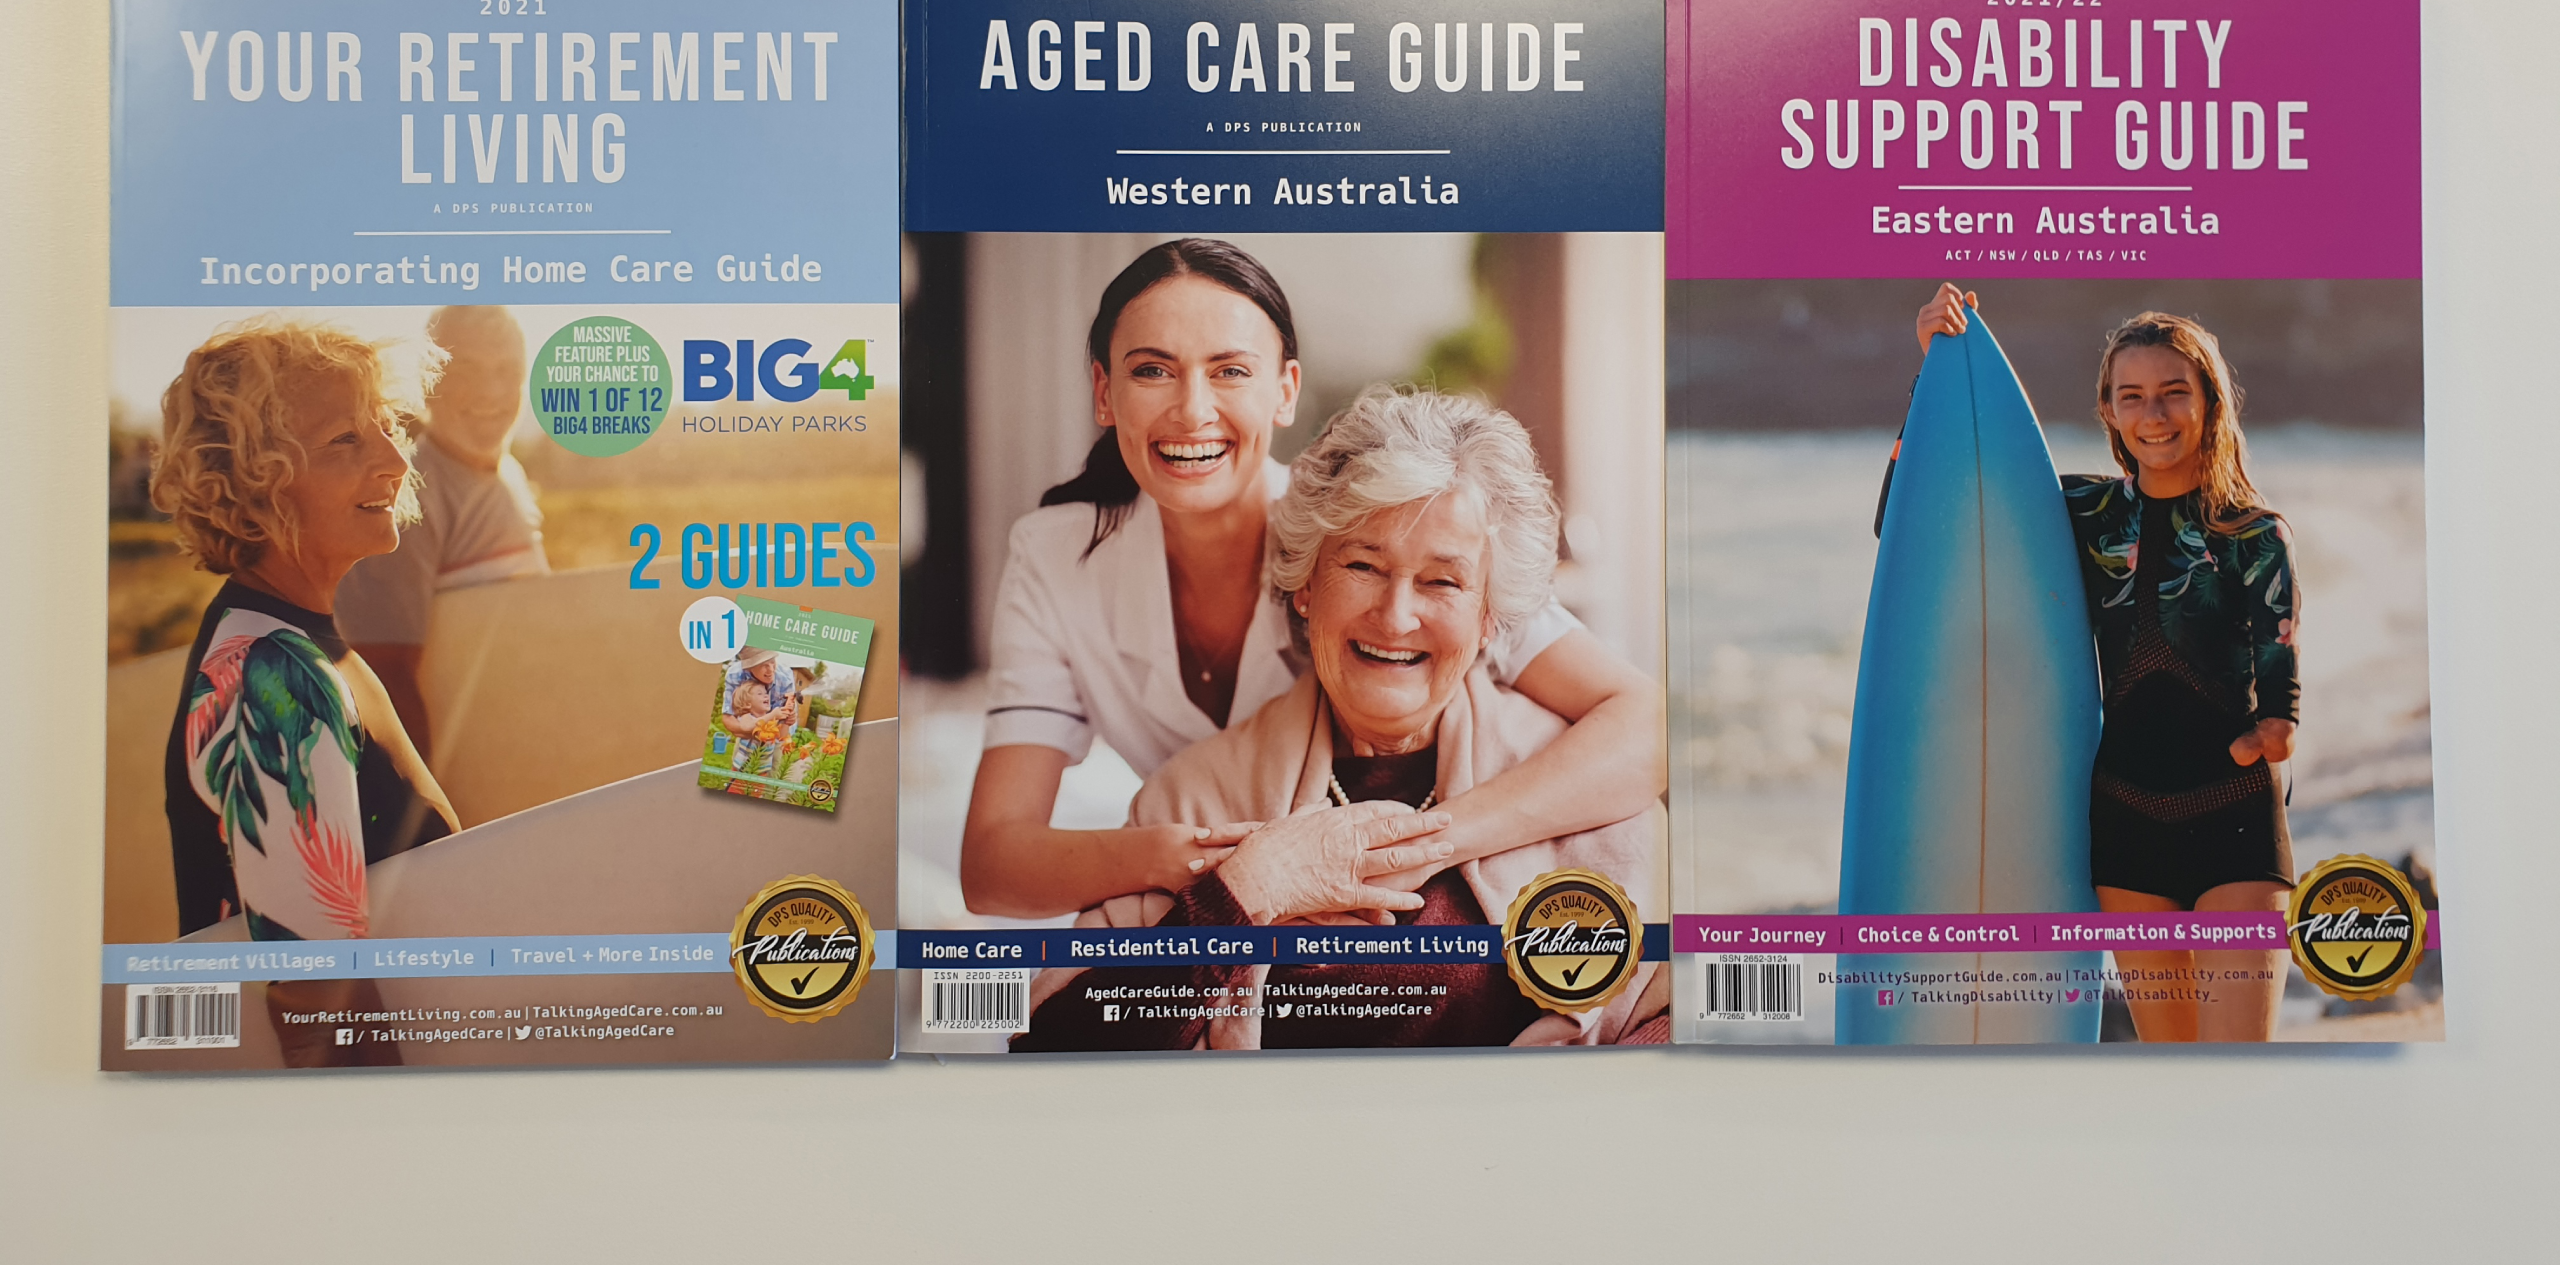 Aged Care Guide 2021, Your Retirement Living 2021 and Disability Support Guide 2021 Publications provided by DPS